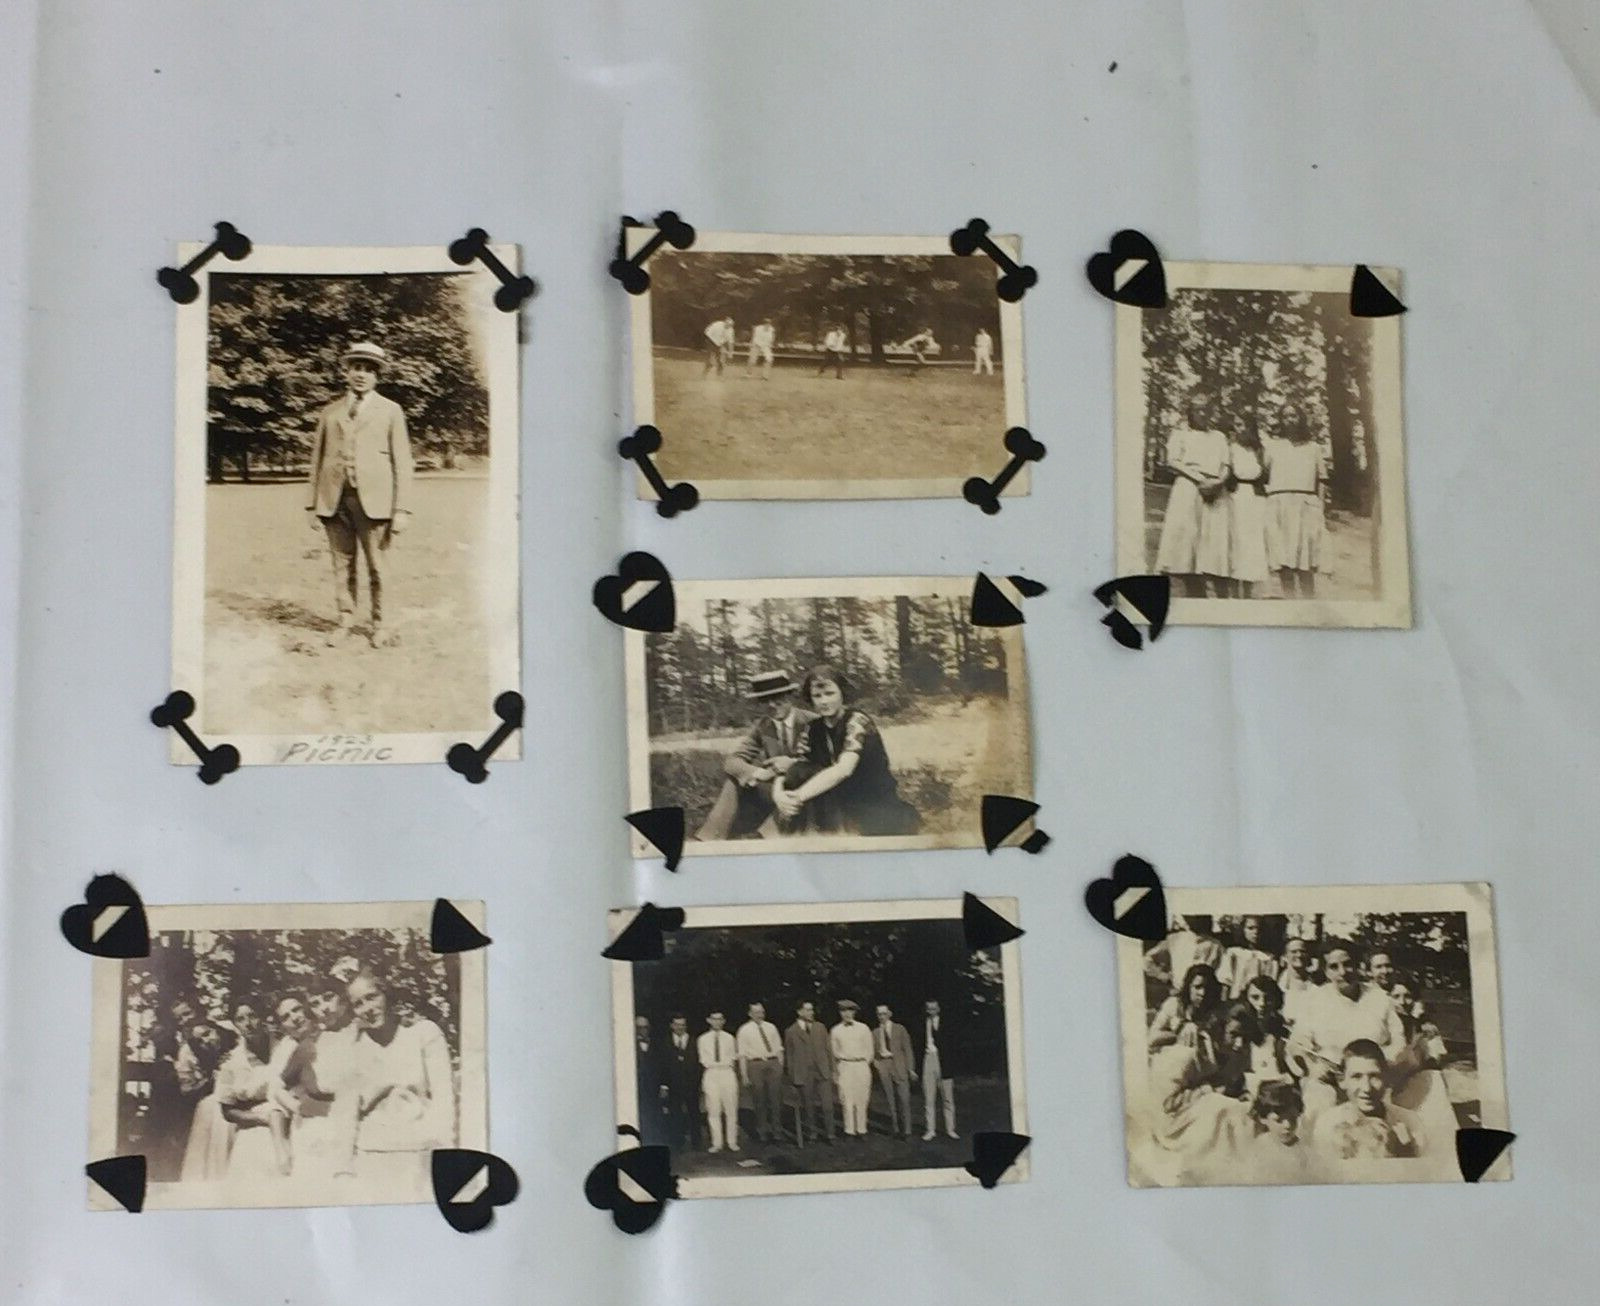 1923 Family Picnic Photographs Women Men in suits Lot of 7 black and white photo